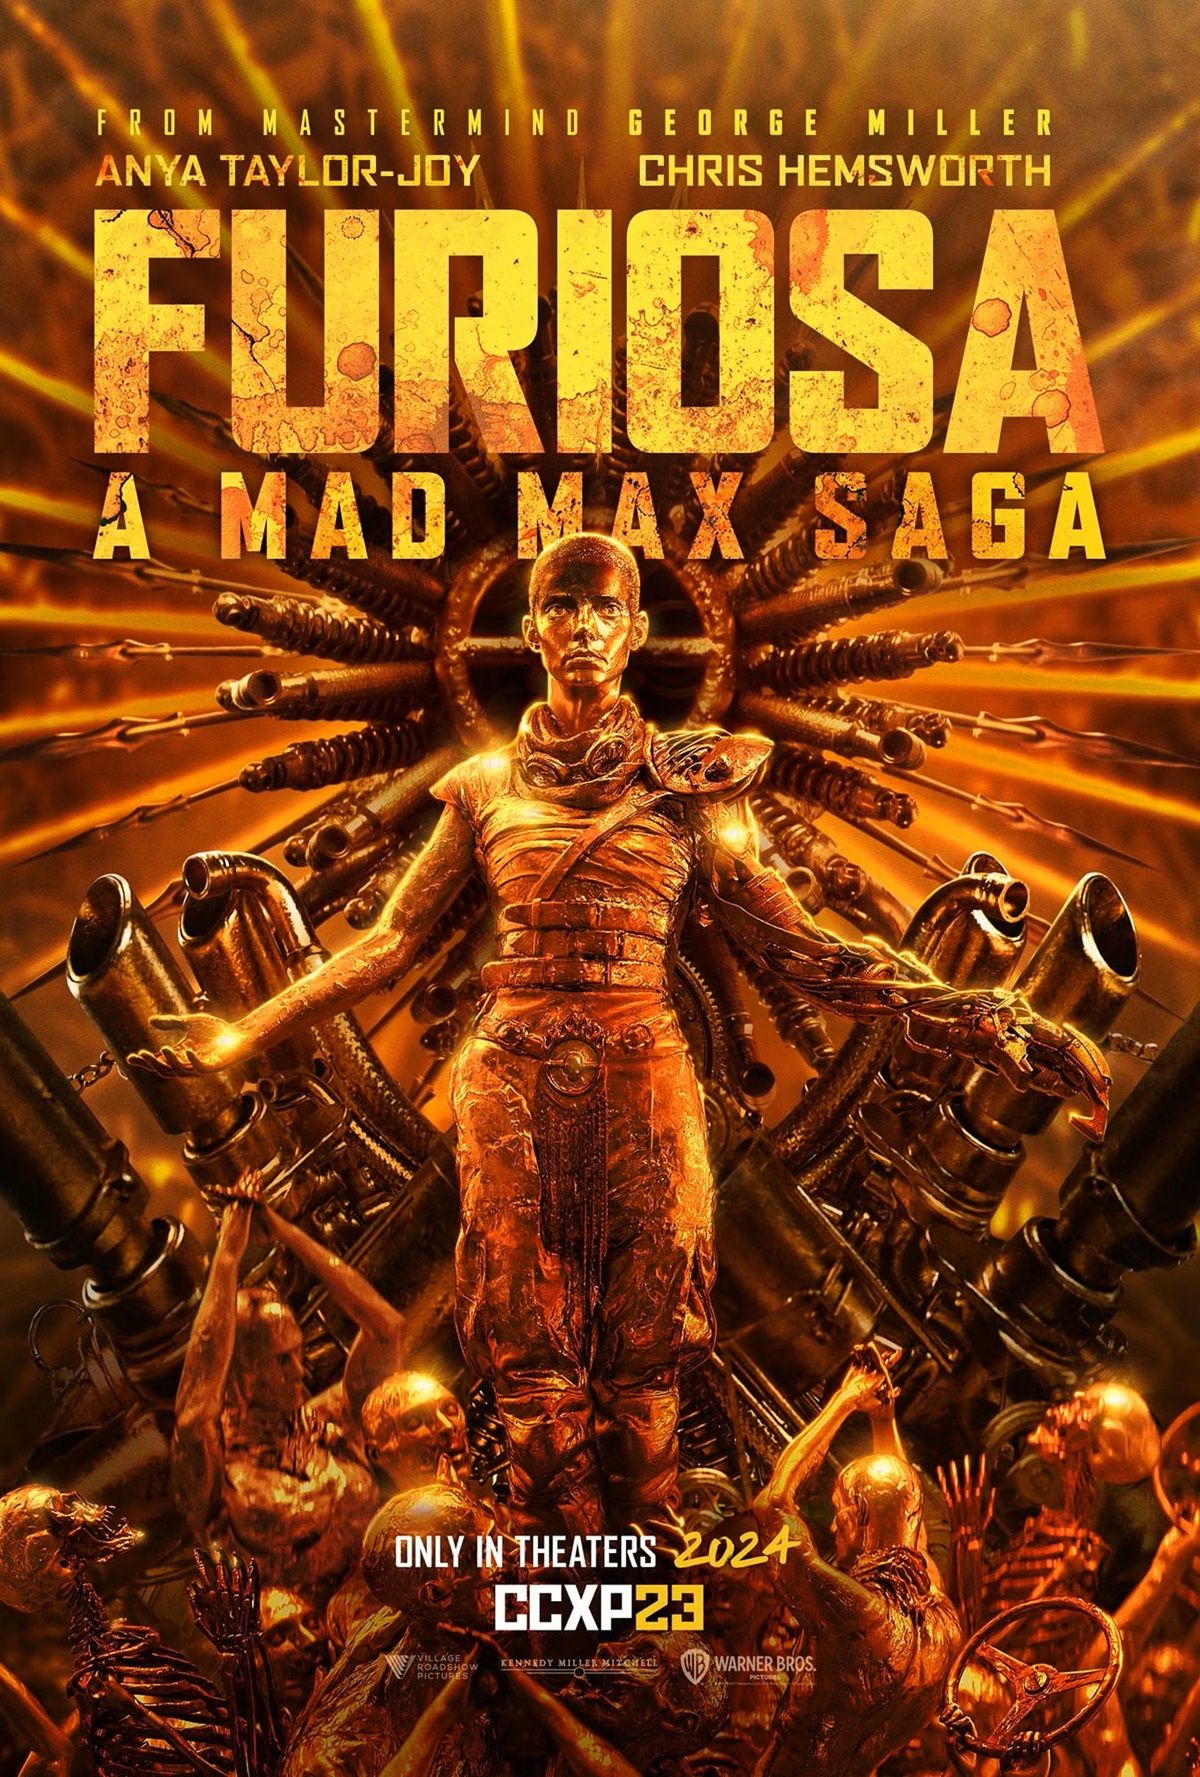 New poster for Furiosa.